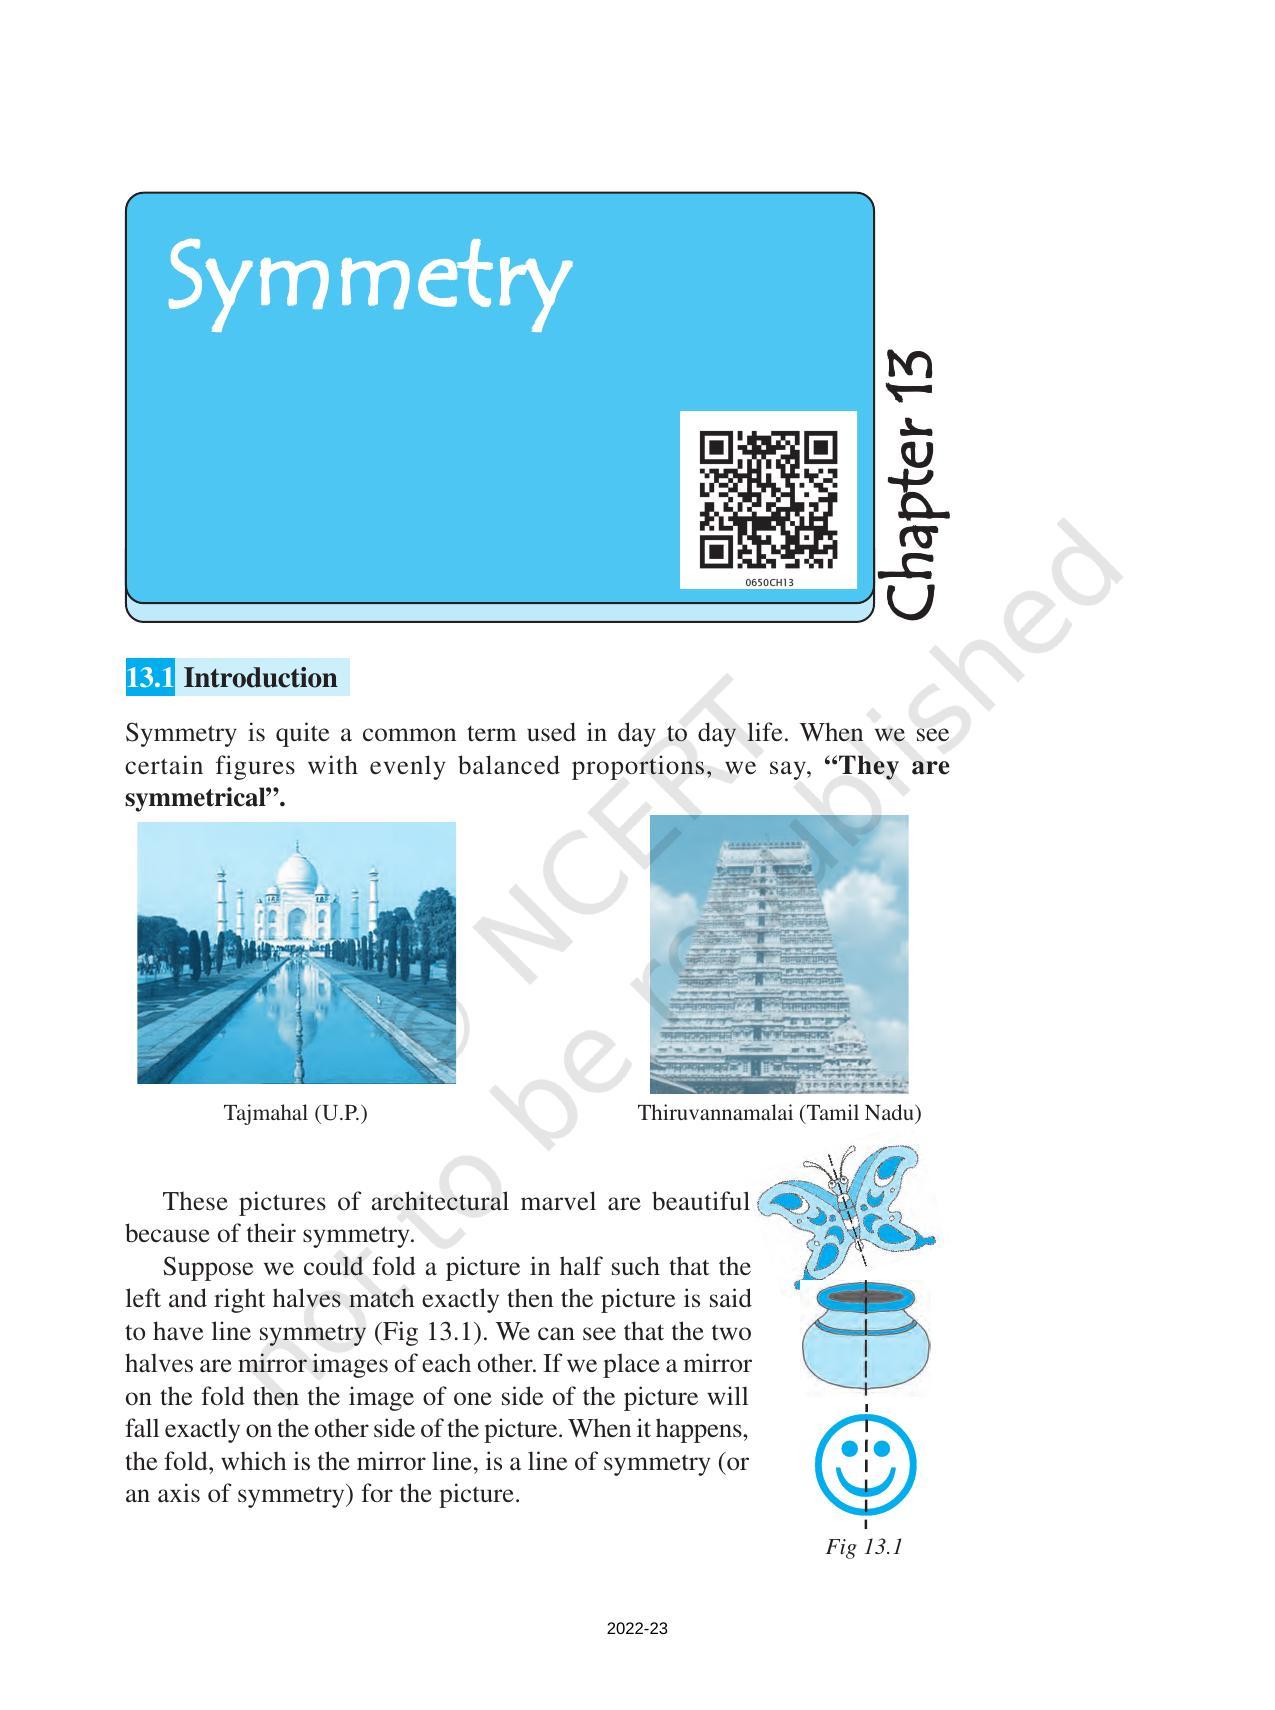 NCERT Book for Class 6 Maths: Chapter 13-Symmetry - Page 1